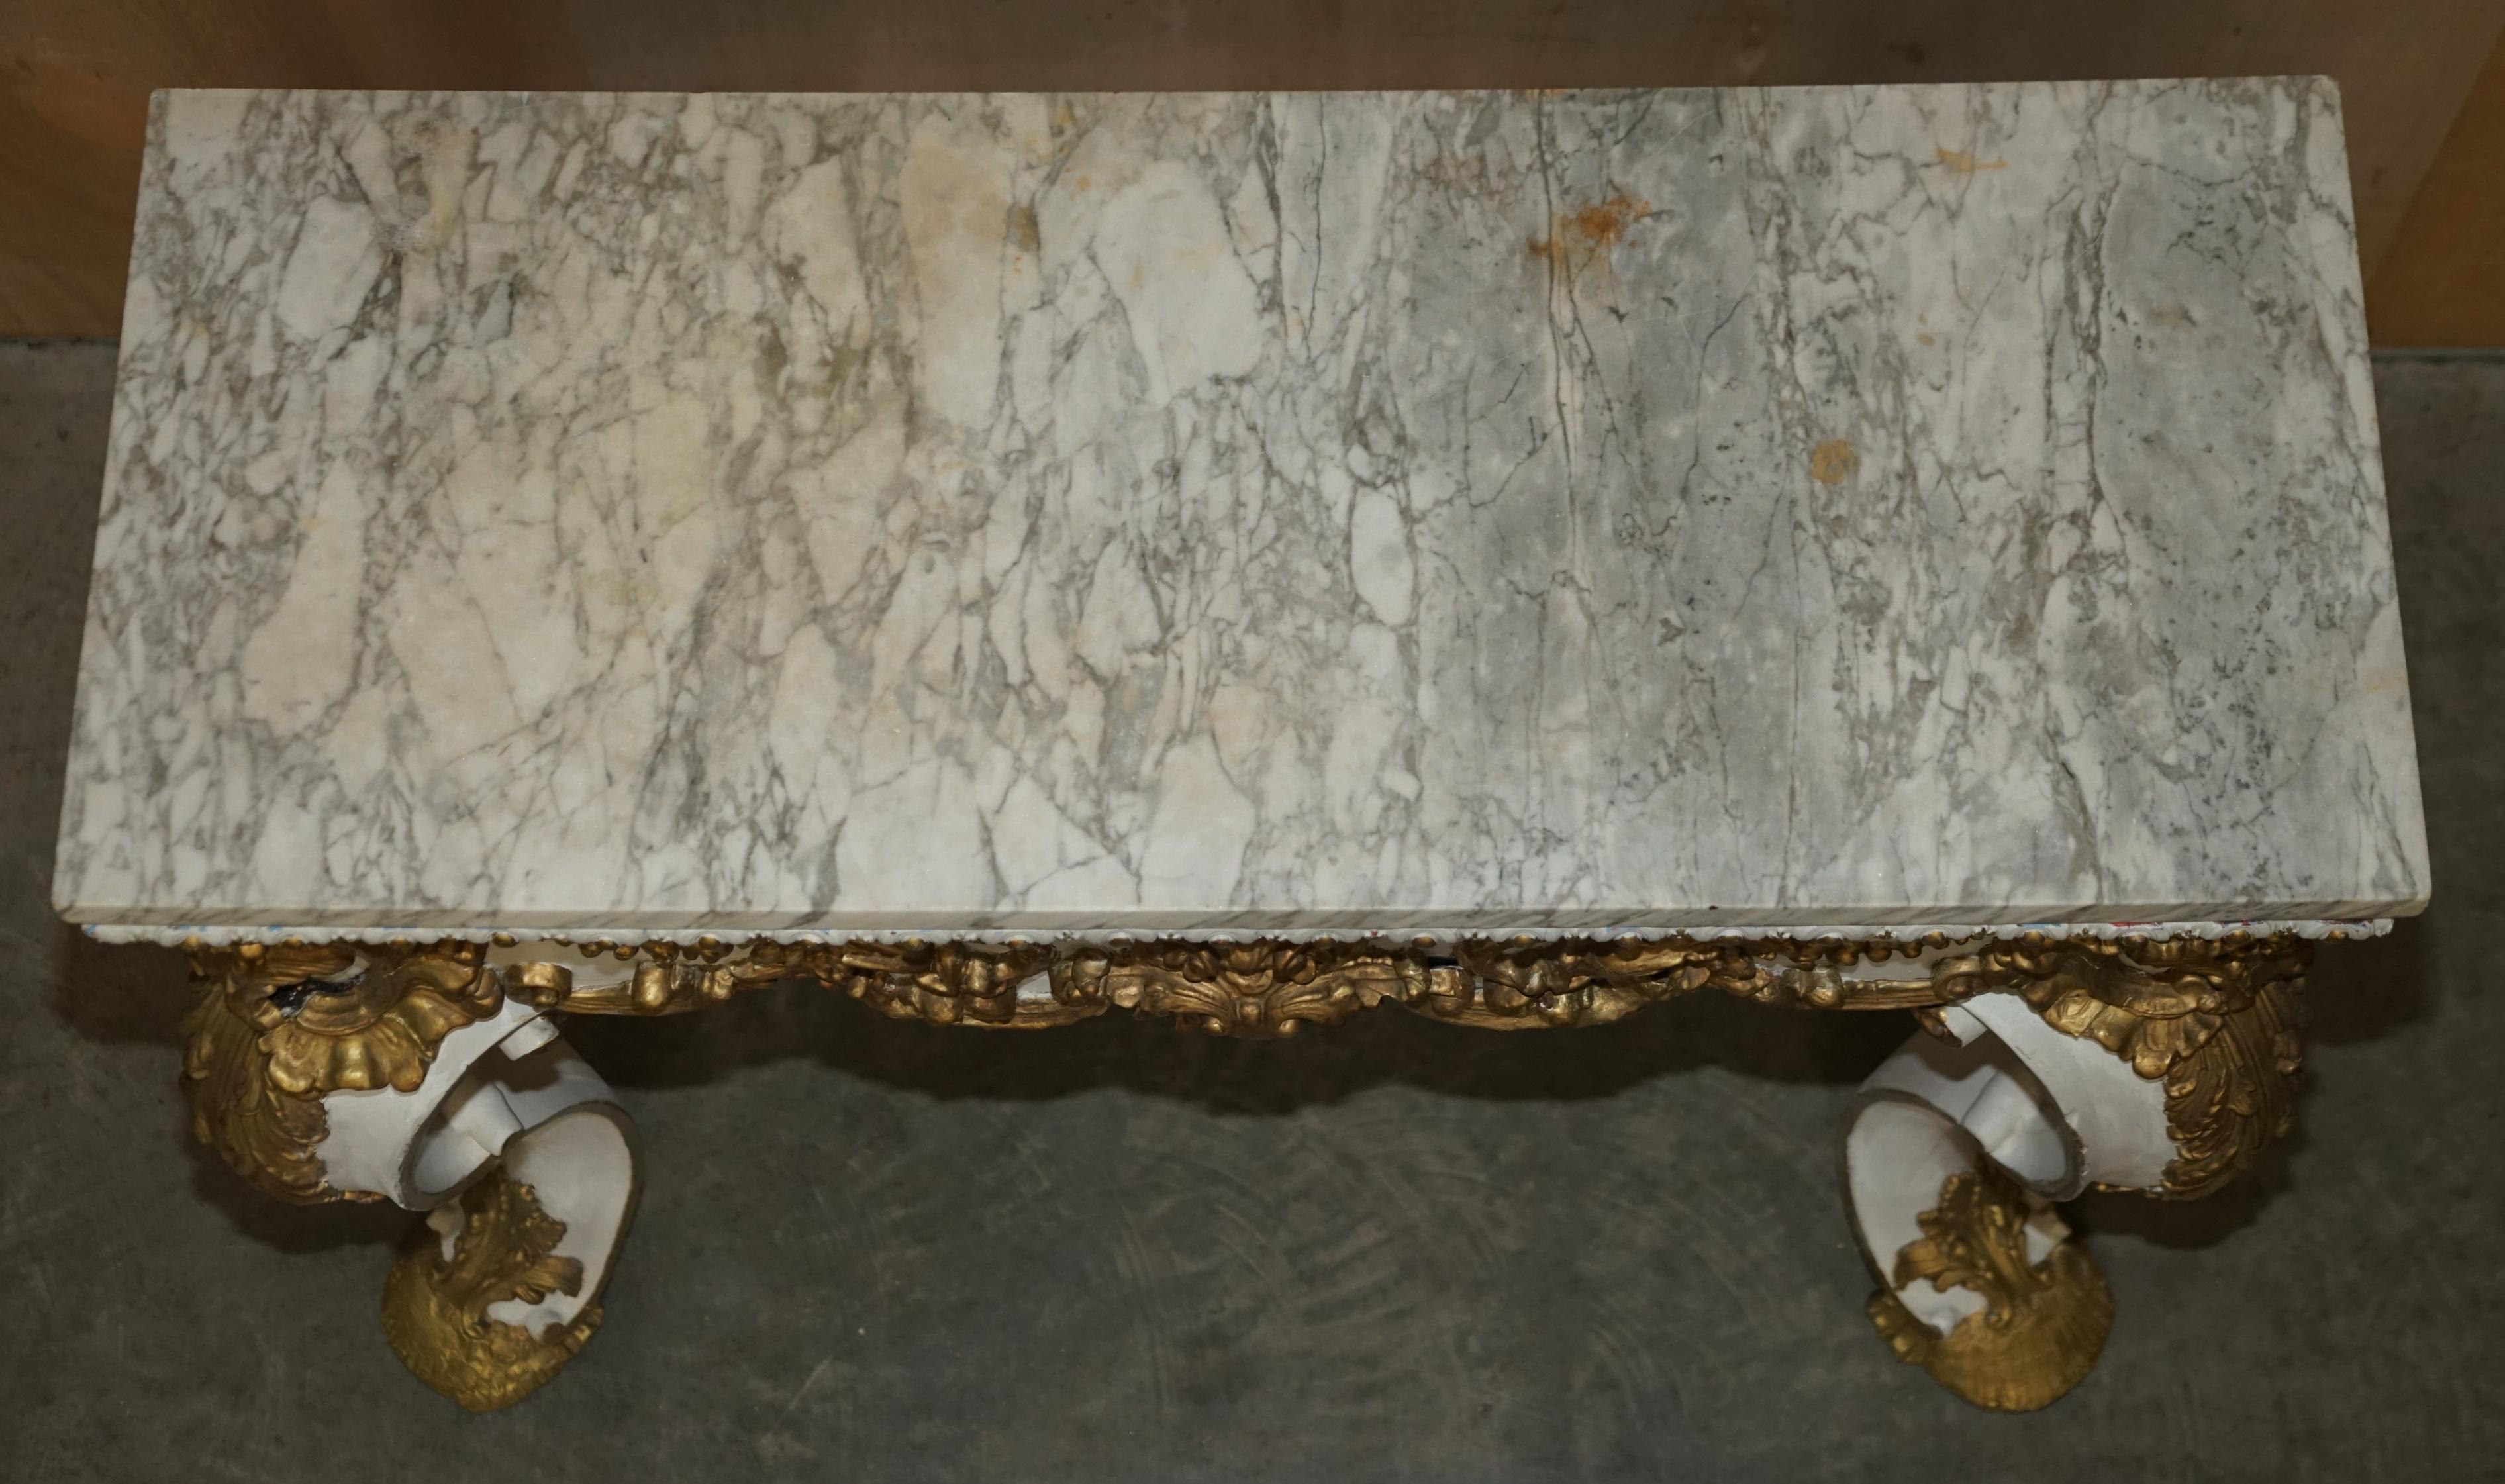 ANTIQUE ITALIAN HAND CARVED GiLTWOOD & MARBLE CONSOLE TABLE CIRCA 1860 VENICE For Sale 9